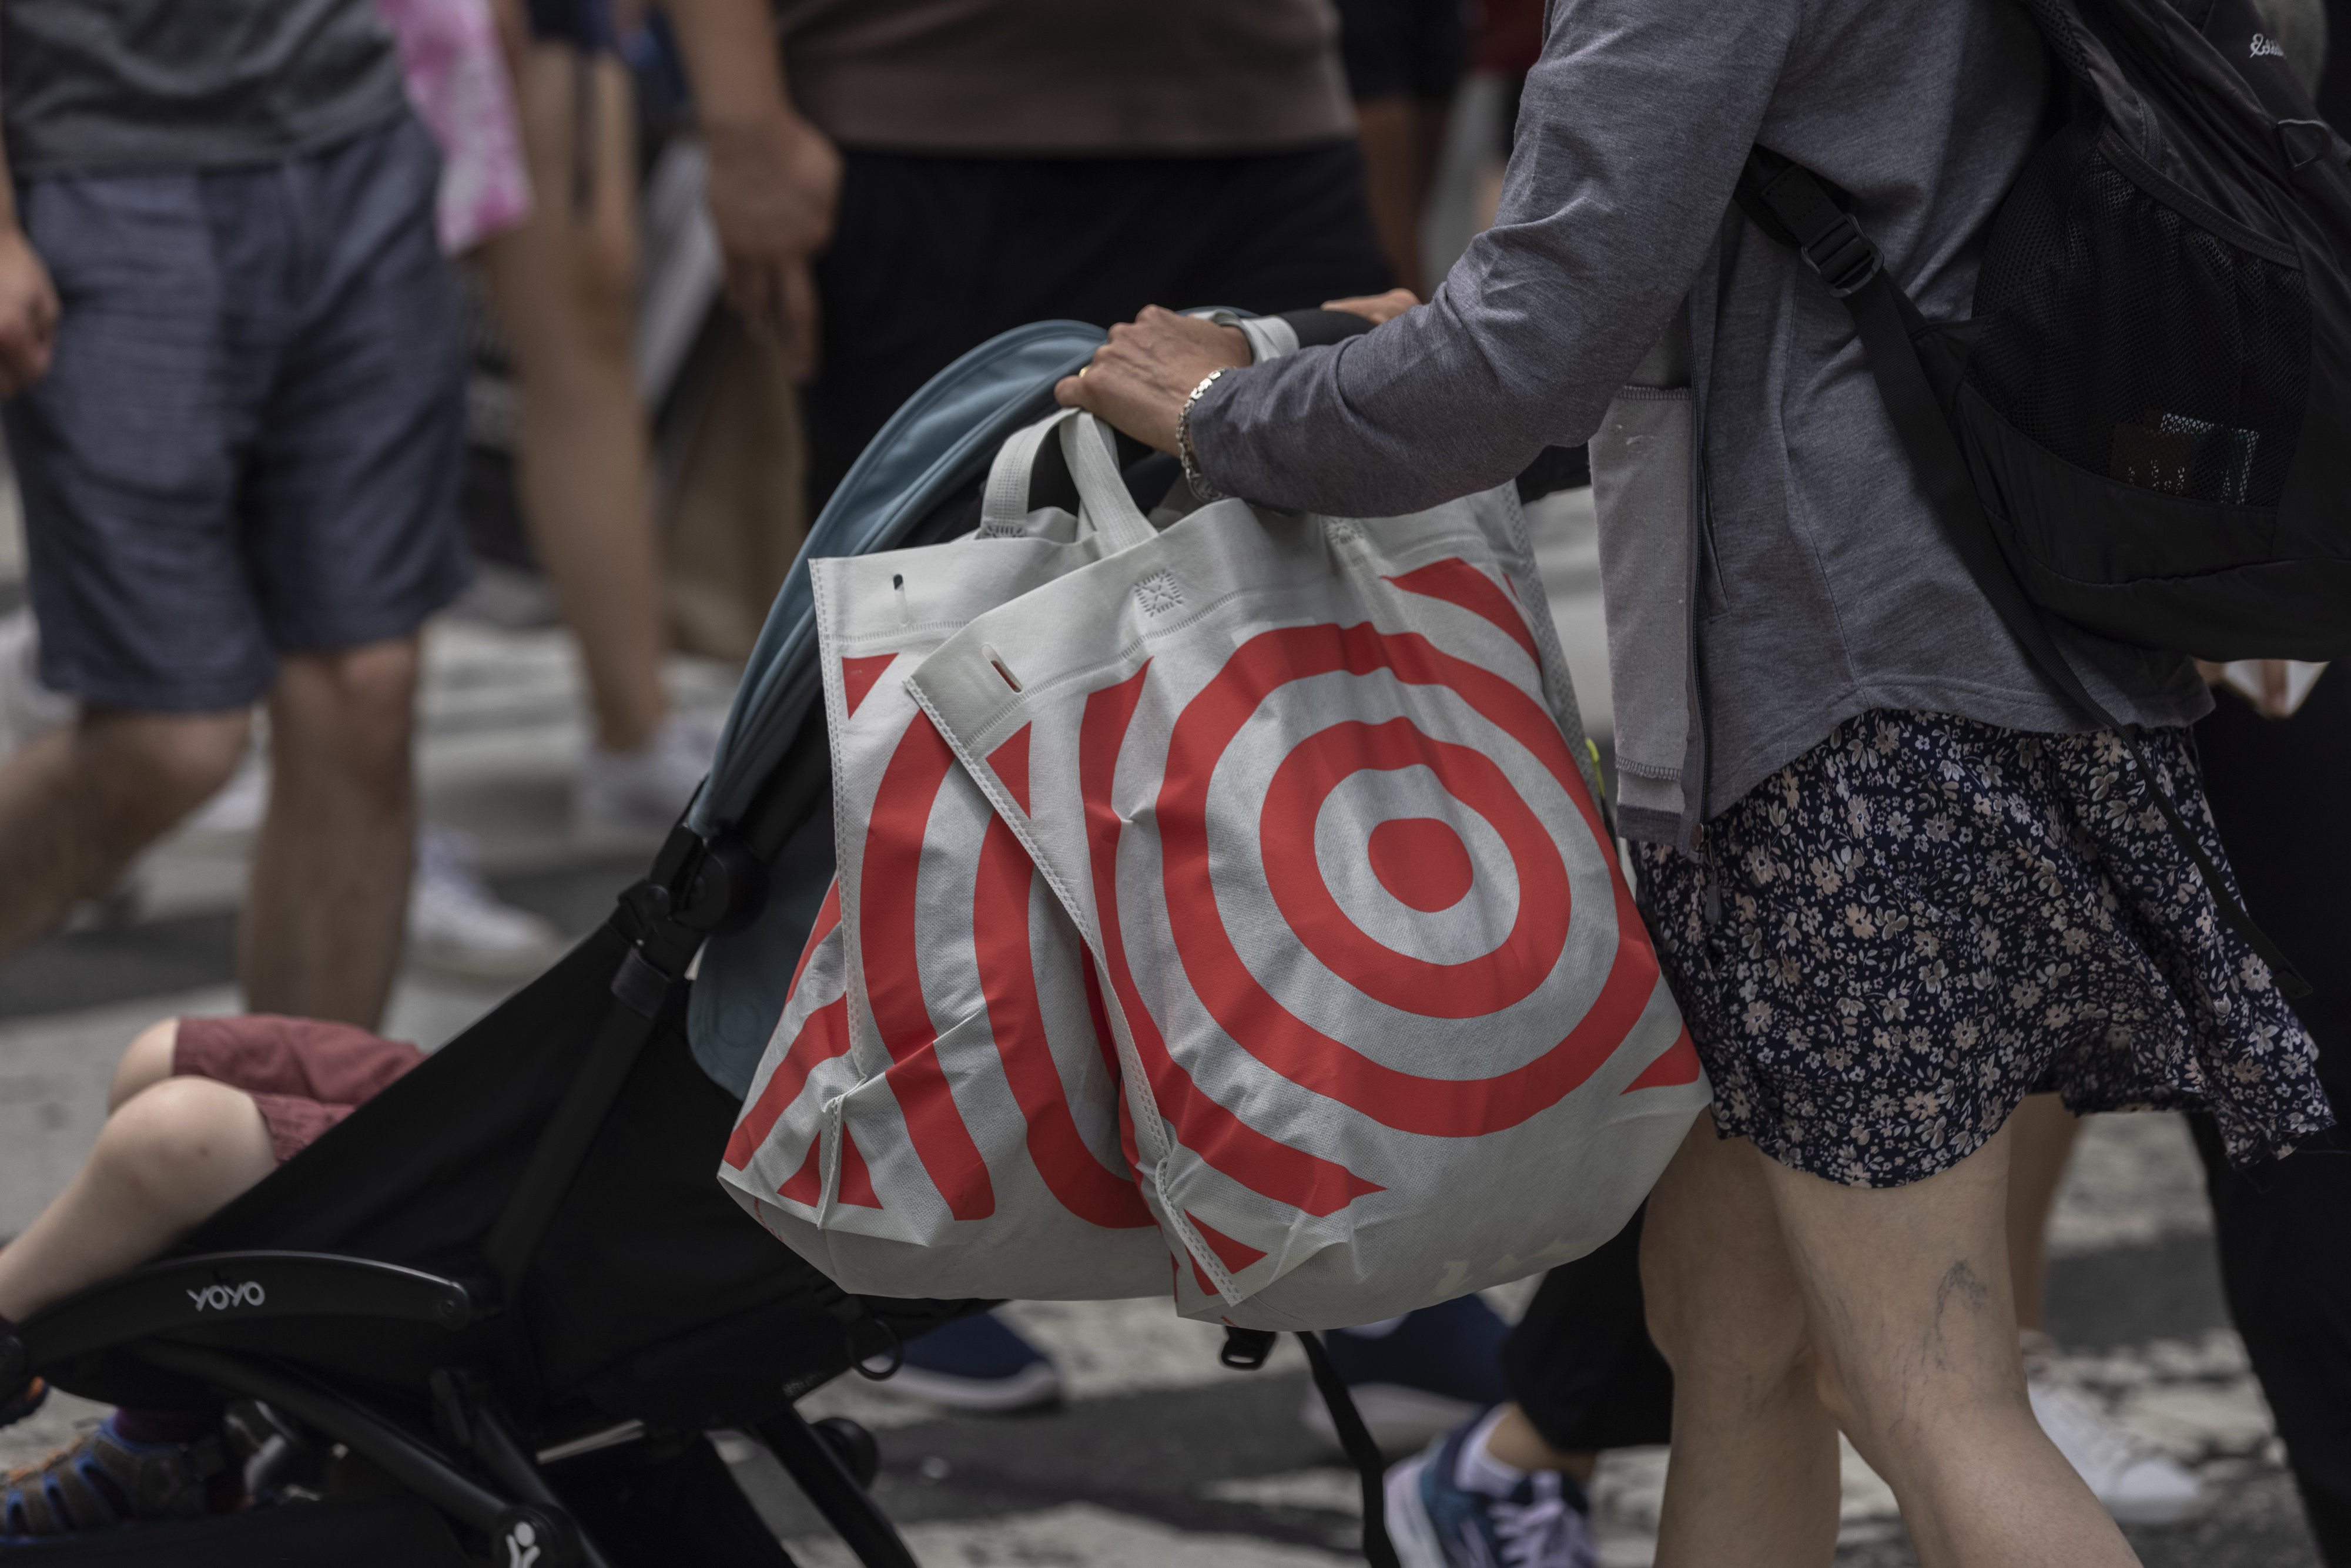 A shopper carries Target bags in New York.